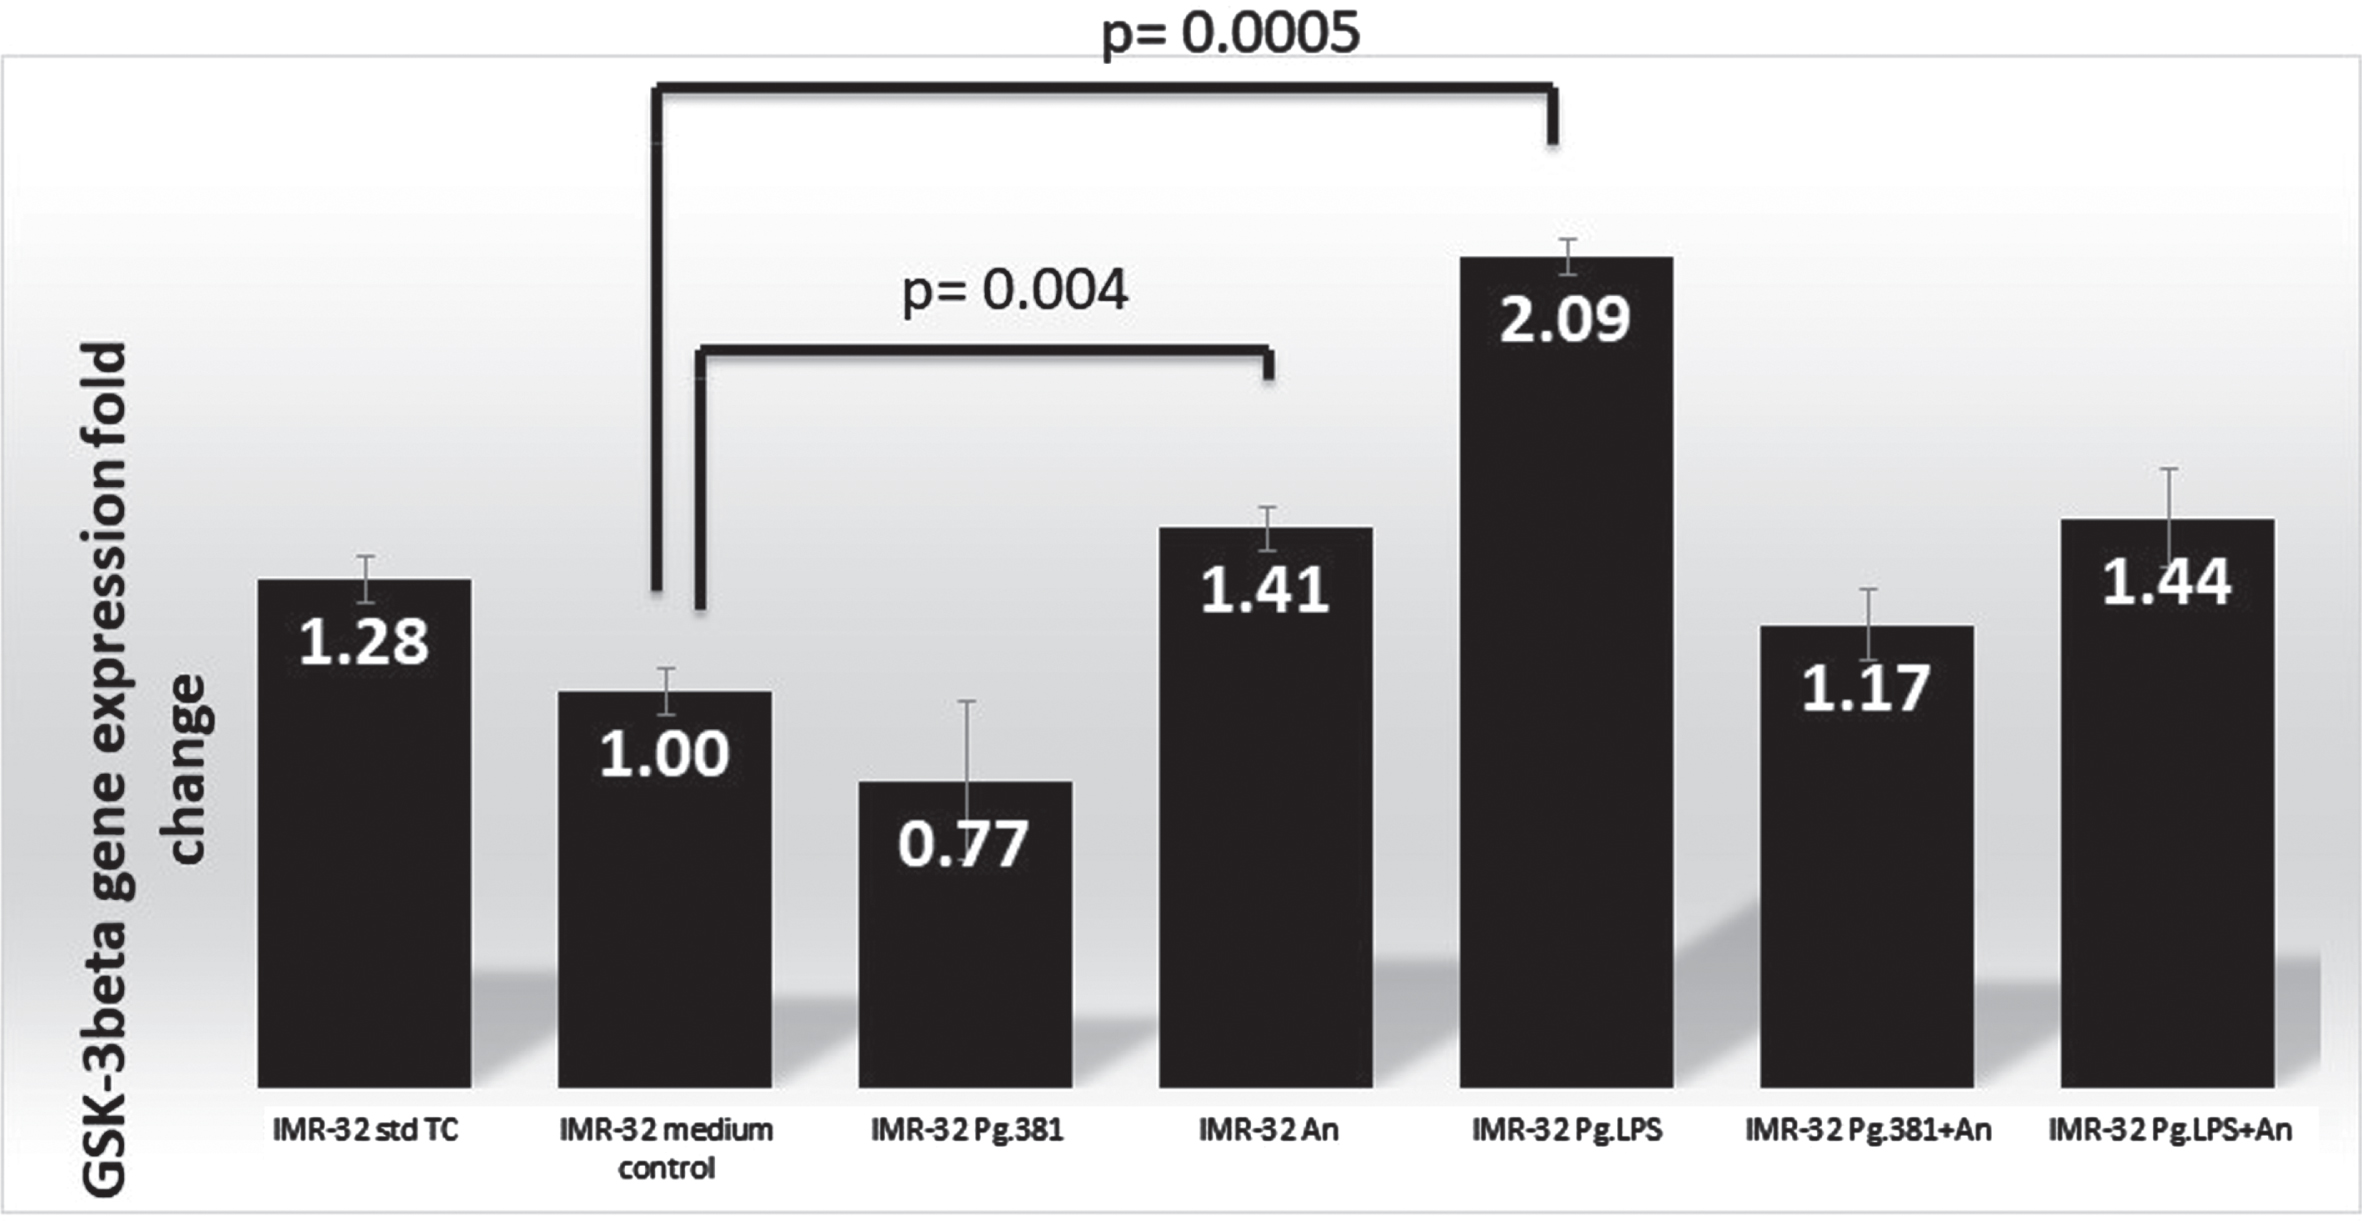 GSK-3β q-PCR analysis. q-PCR analysis: There is a statistically significant difference in the IMR32 mRNA fold change (number within each black bar represents fold change) in the expression of GSK-3β by q-PCR analysis (N = 3) across the medium control and IMR-32 A. naeslundii (p = 0.004) and IMR-32 PgLPS (p = 0.0005) as analyzed by the two variant T-Test.